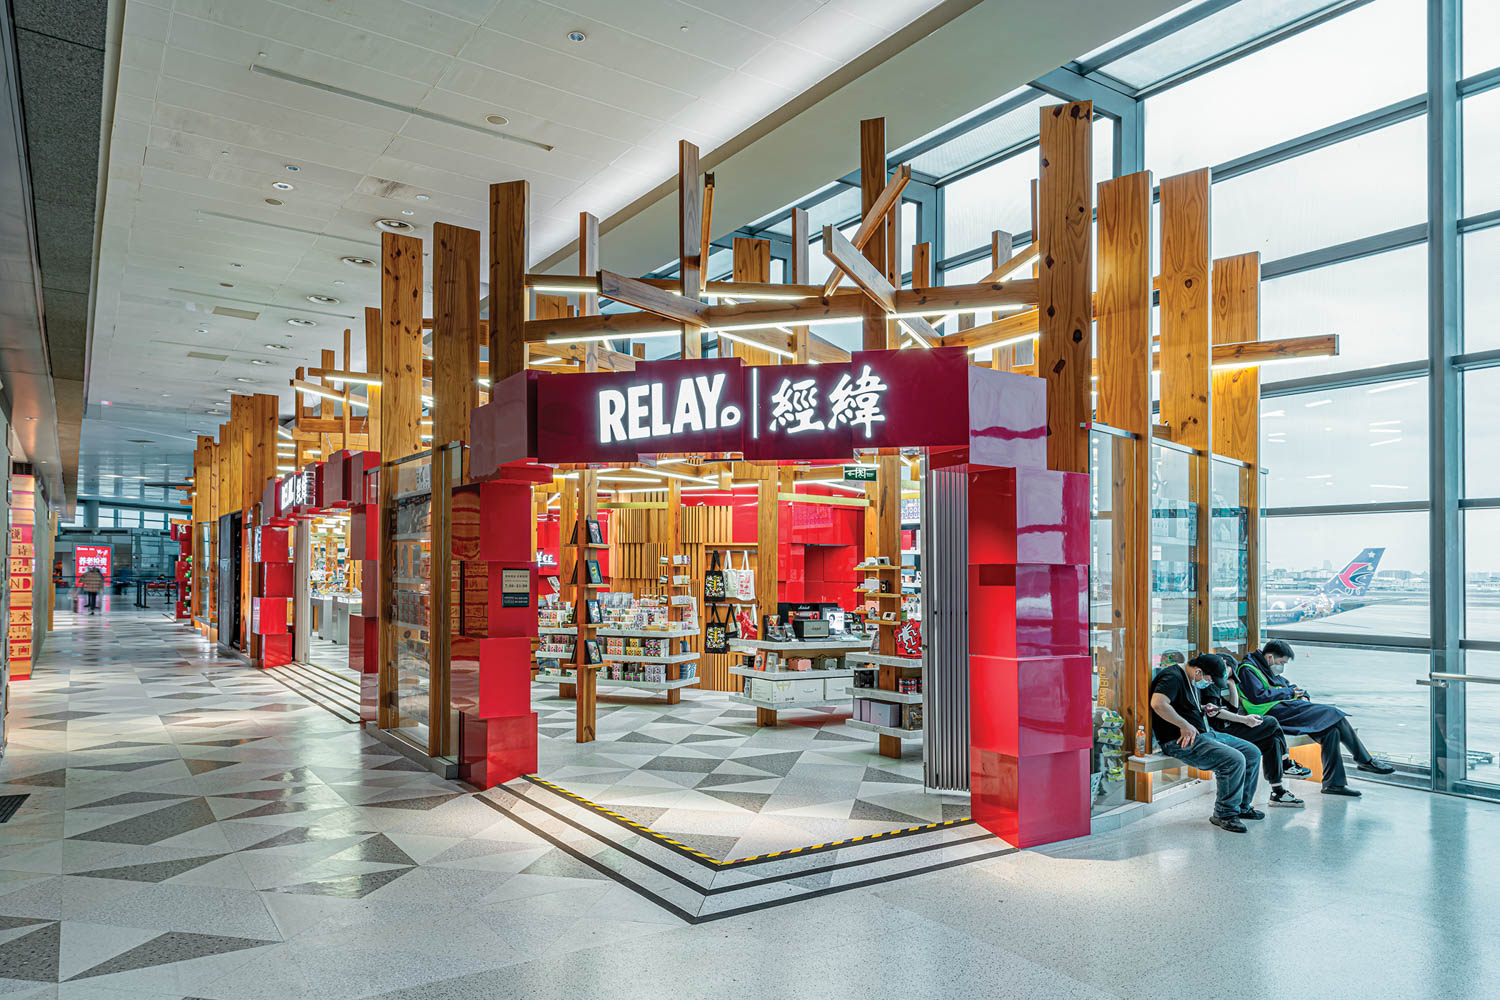 the entrance to Relay, an airport bookstore in Shanghai